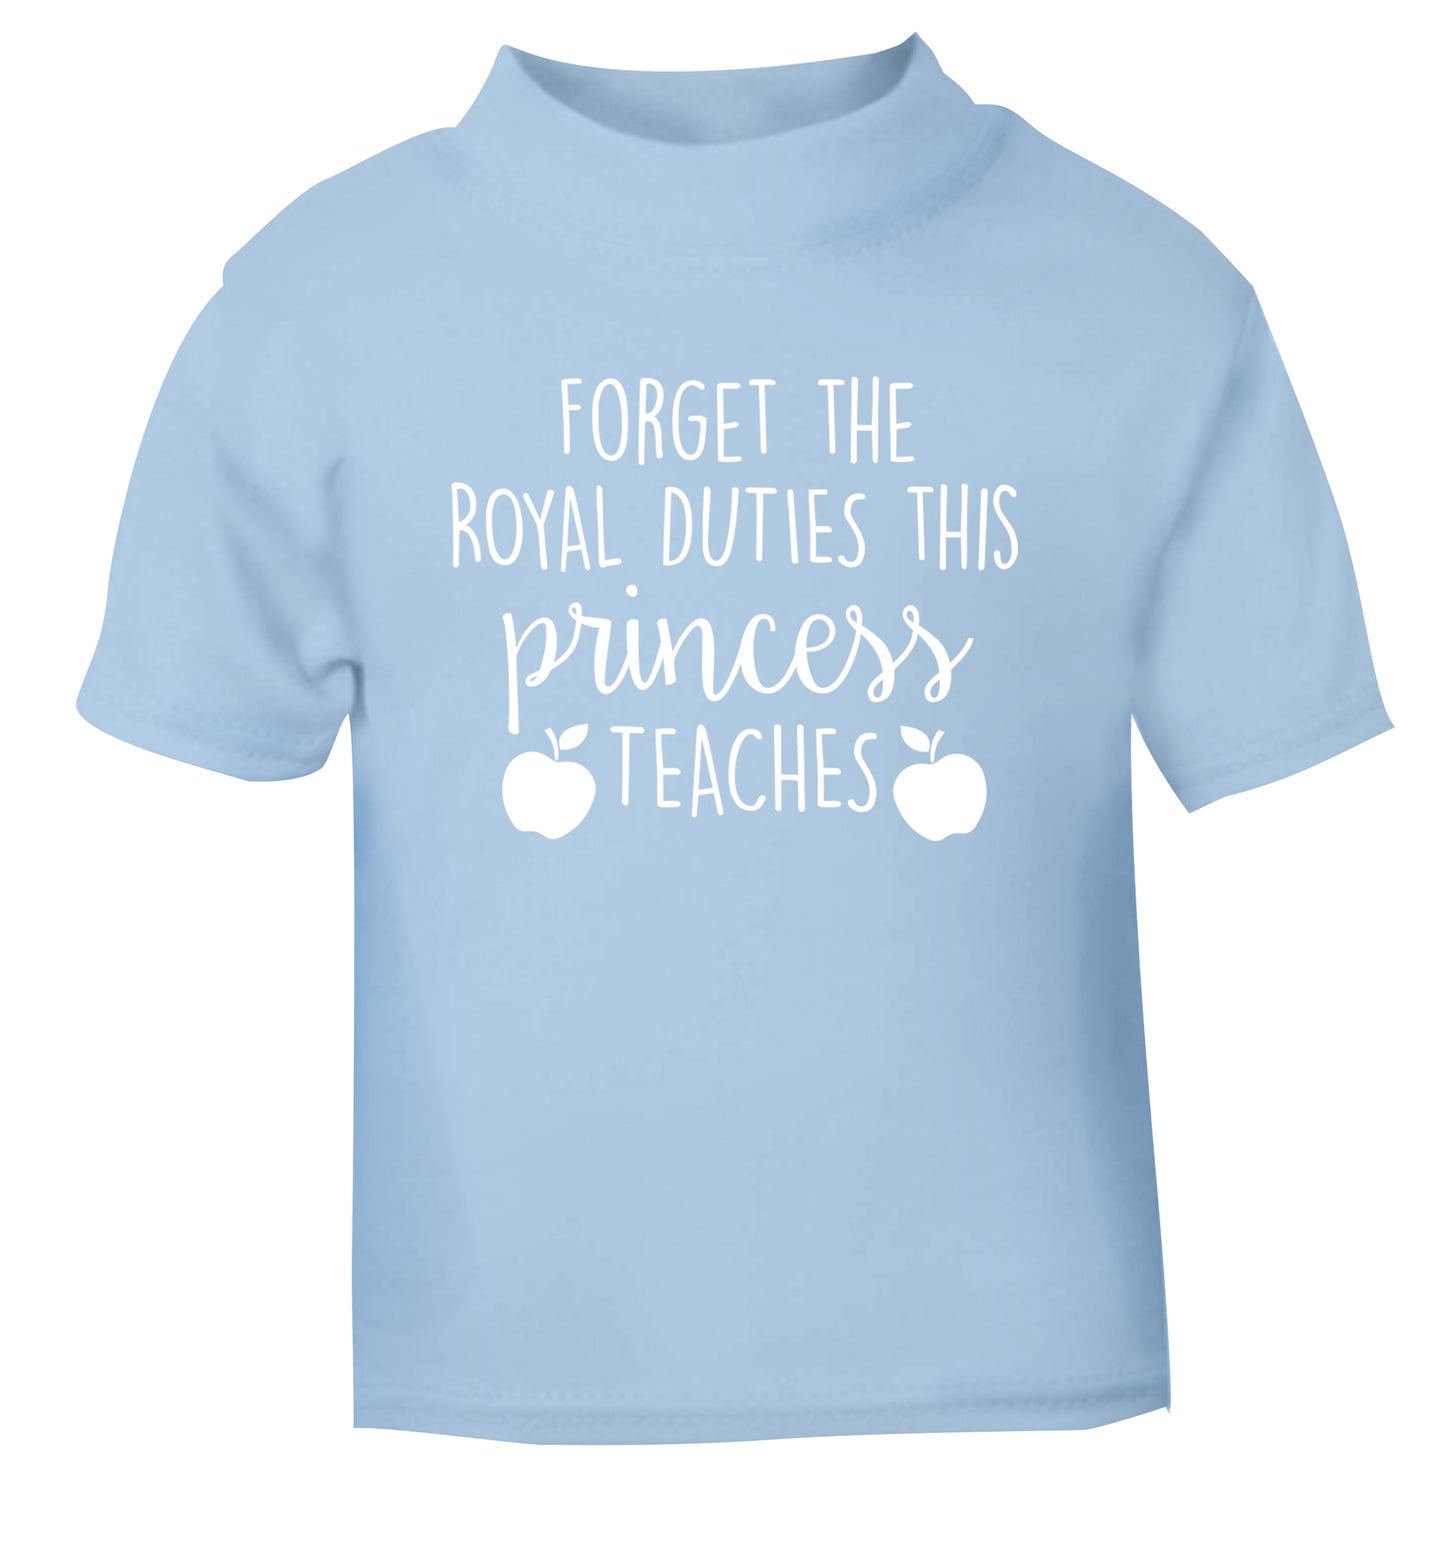 Forget the royal duties this princess teaches light blue Baby Toddler Tshirt 2 Years